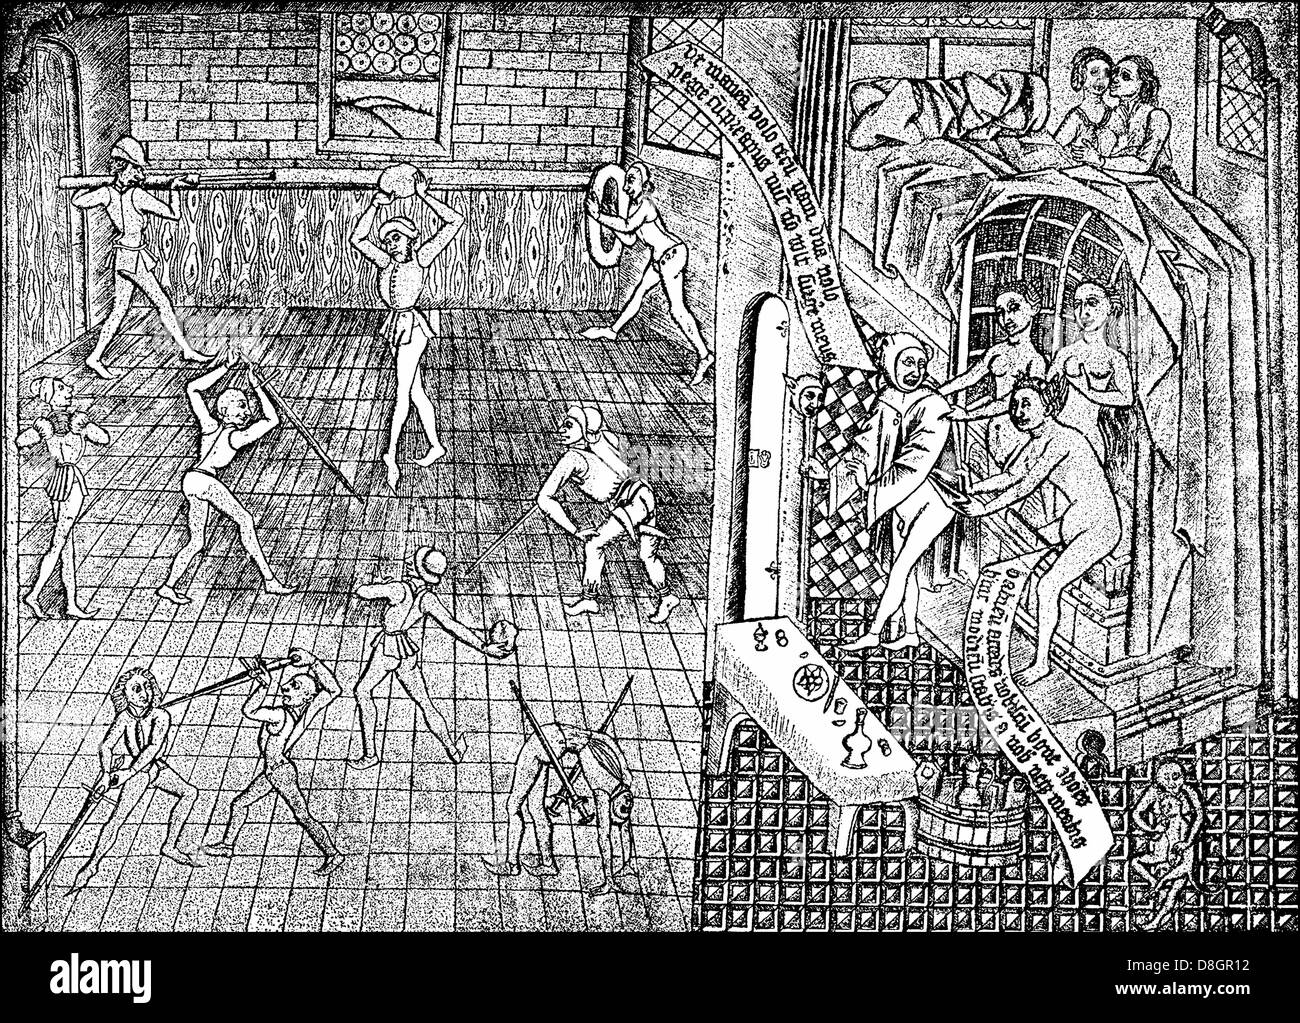 The joy of life, Fencing and a house of prostitution, 15th century, Stock Photo